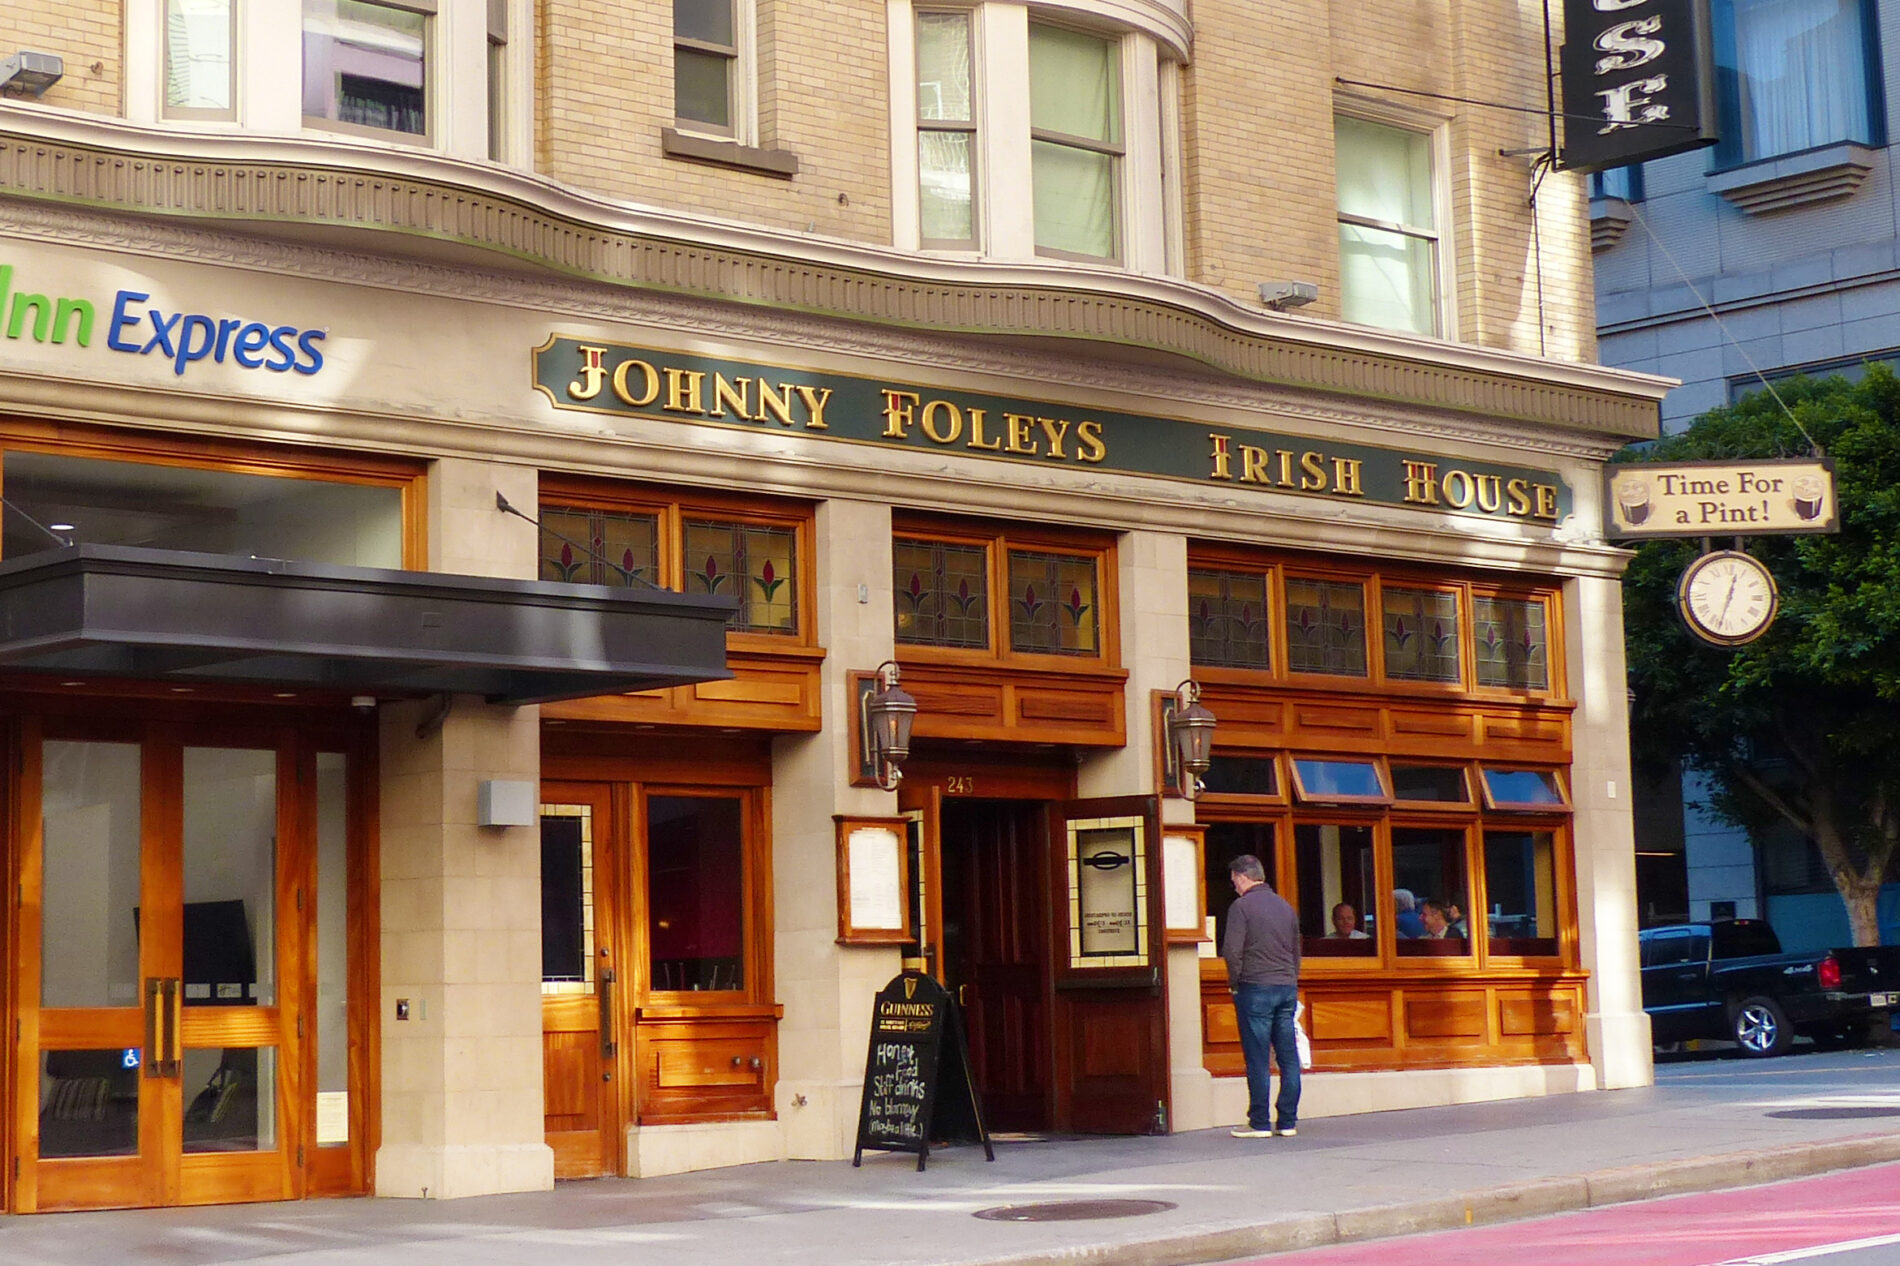 Johnny Foley’s Irish House, near Union Square, is a popular place to take a break from San Francisco sightseeing and shopping.